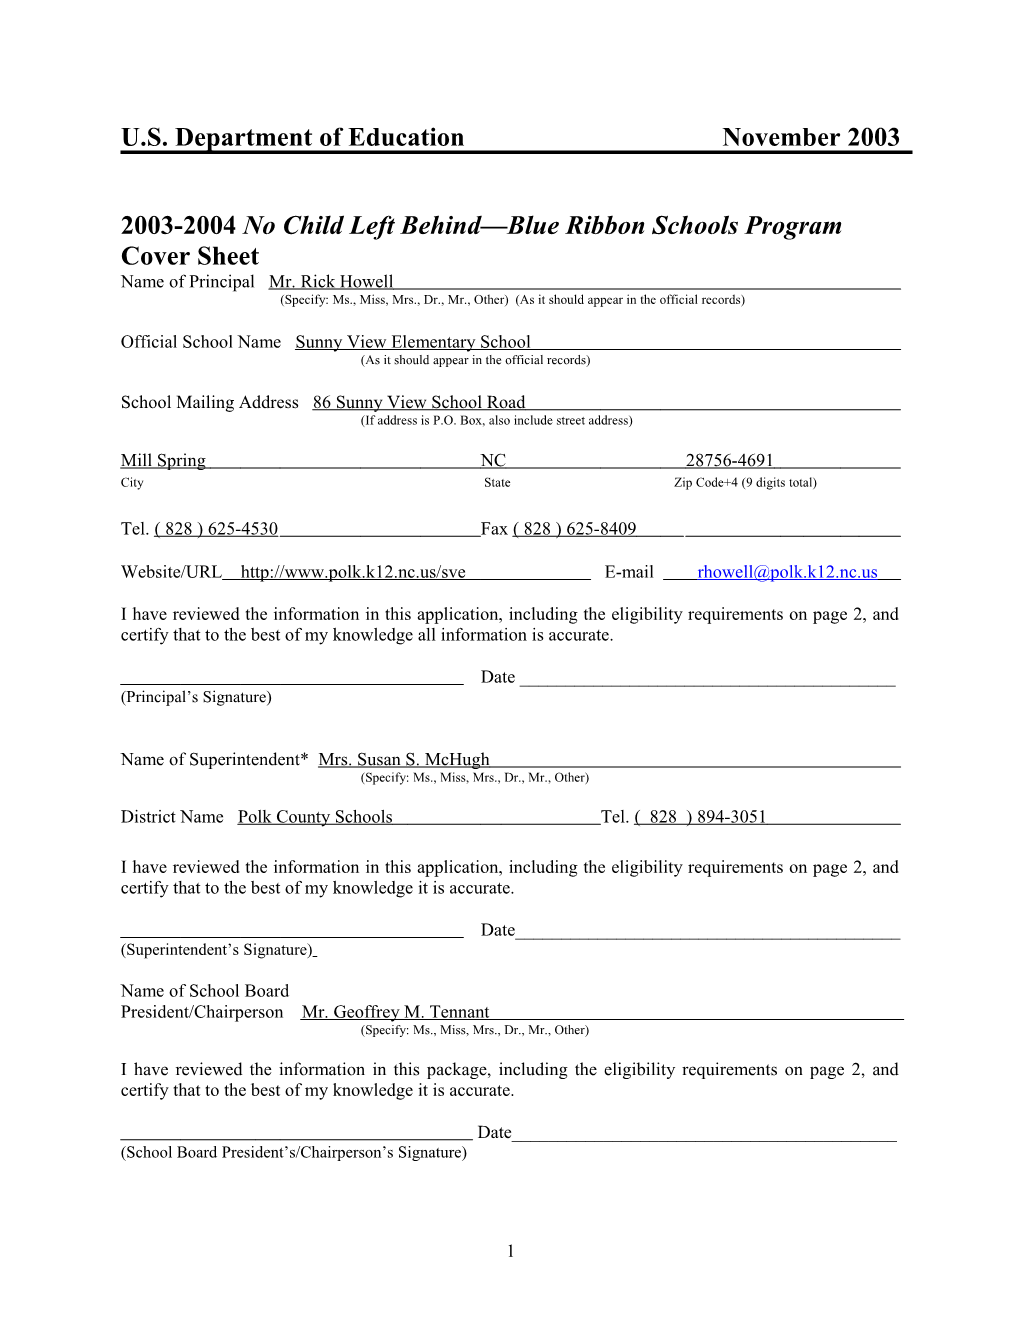 Sunny View Elementary School 2004 No Child Left Behind-Blue Ribbon School Application (Msword)